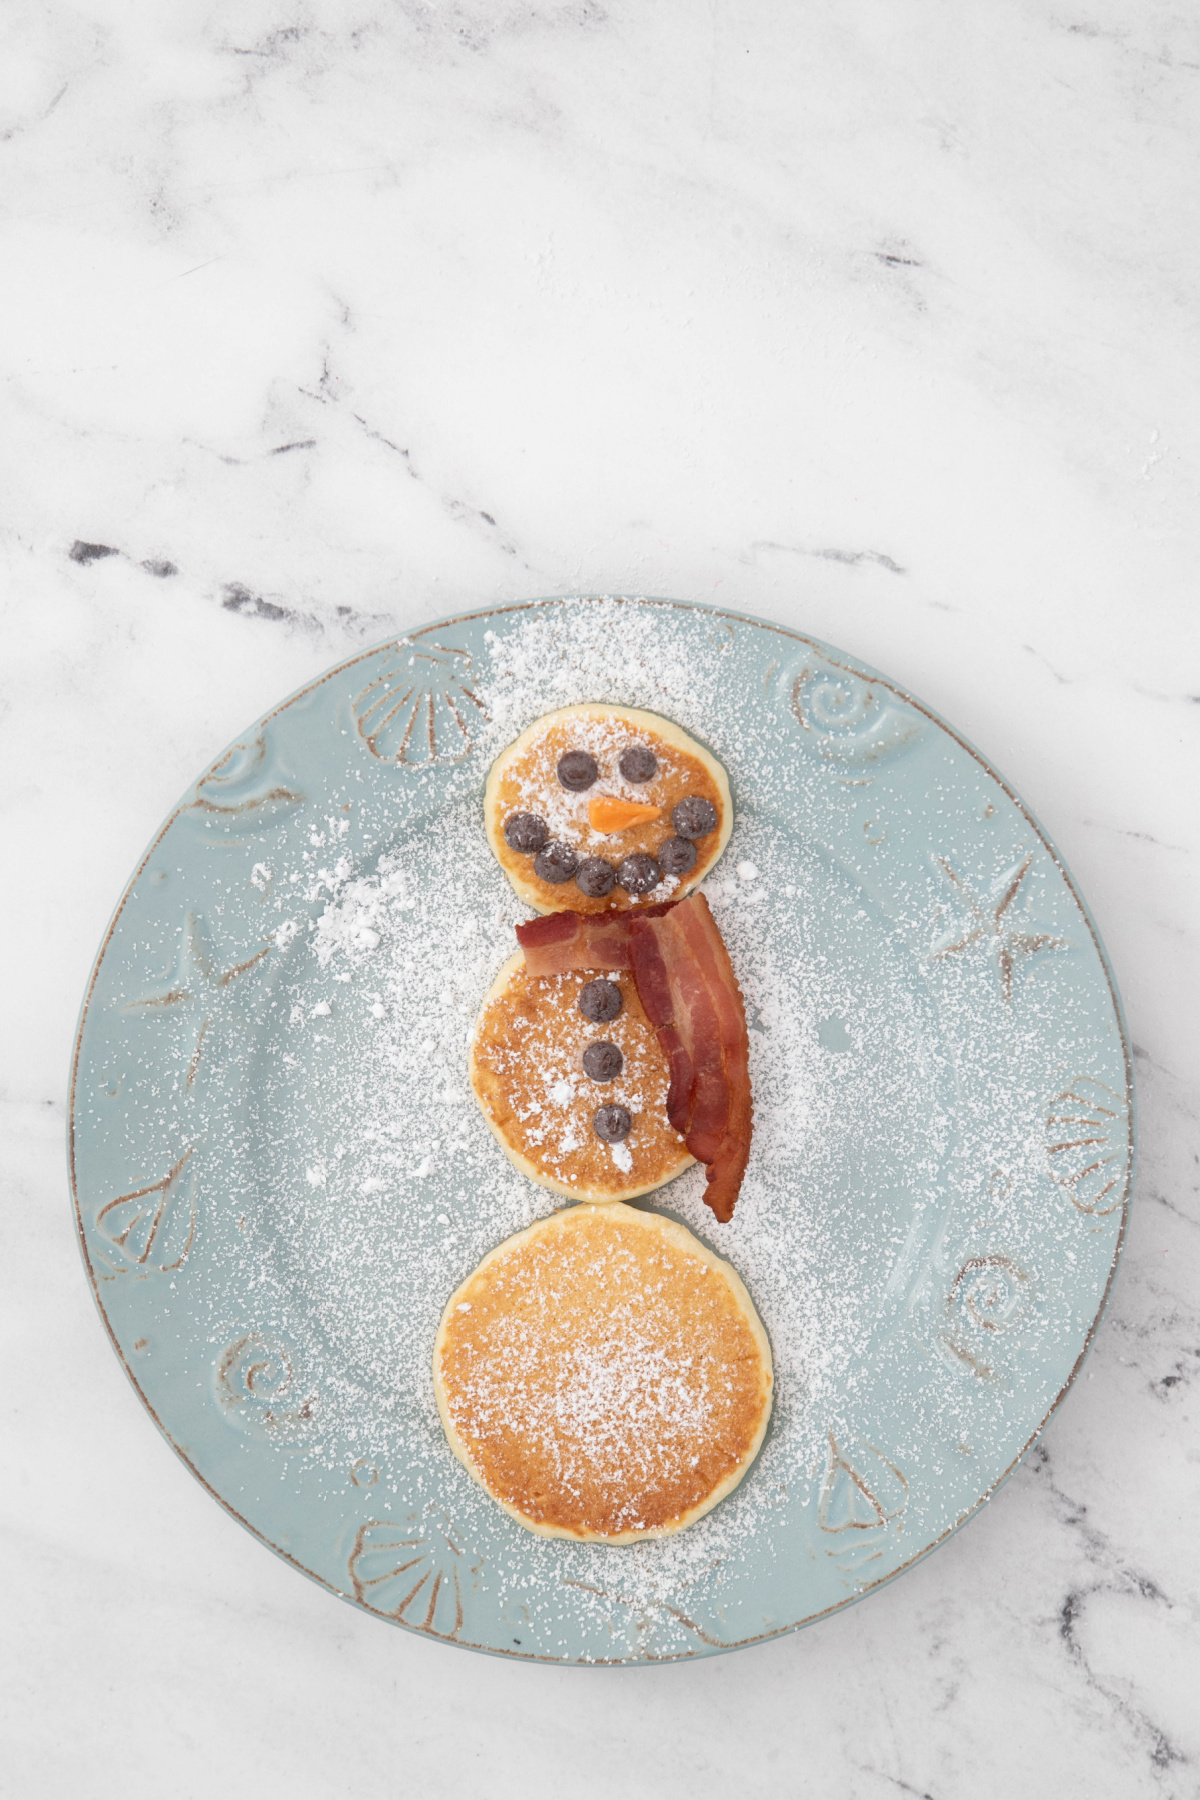 Snowman pancakes with bacon scarf added on a plate with powdered sugar.